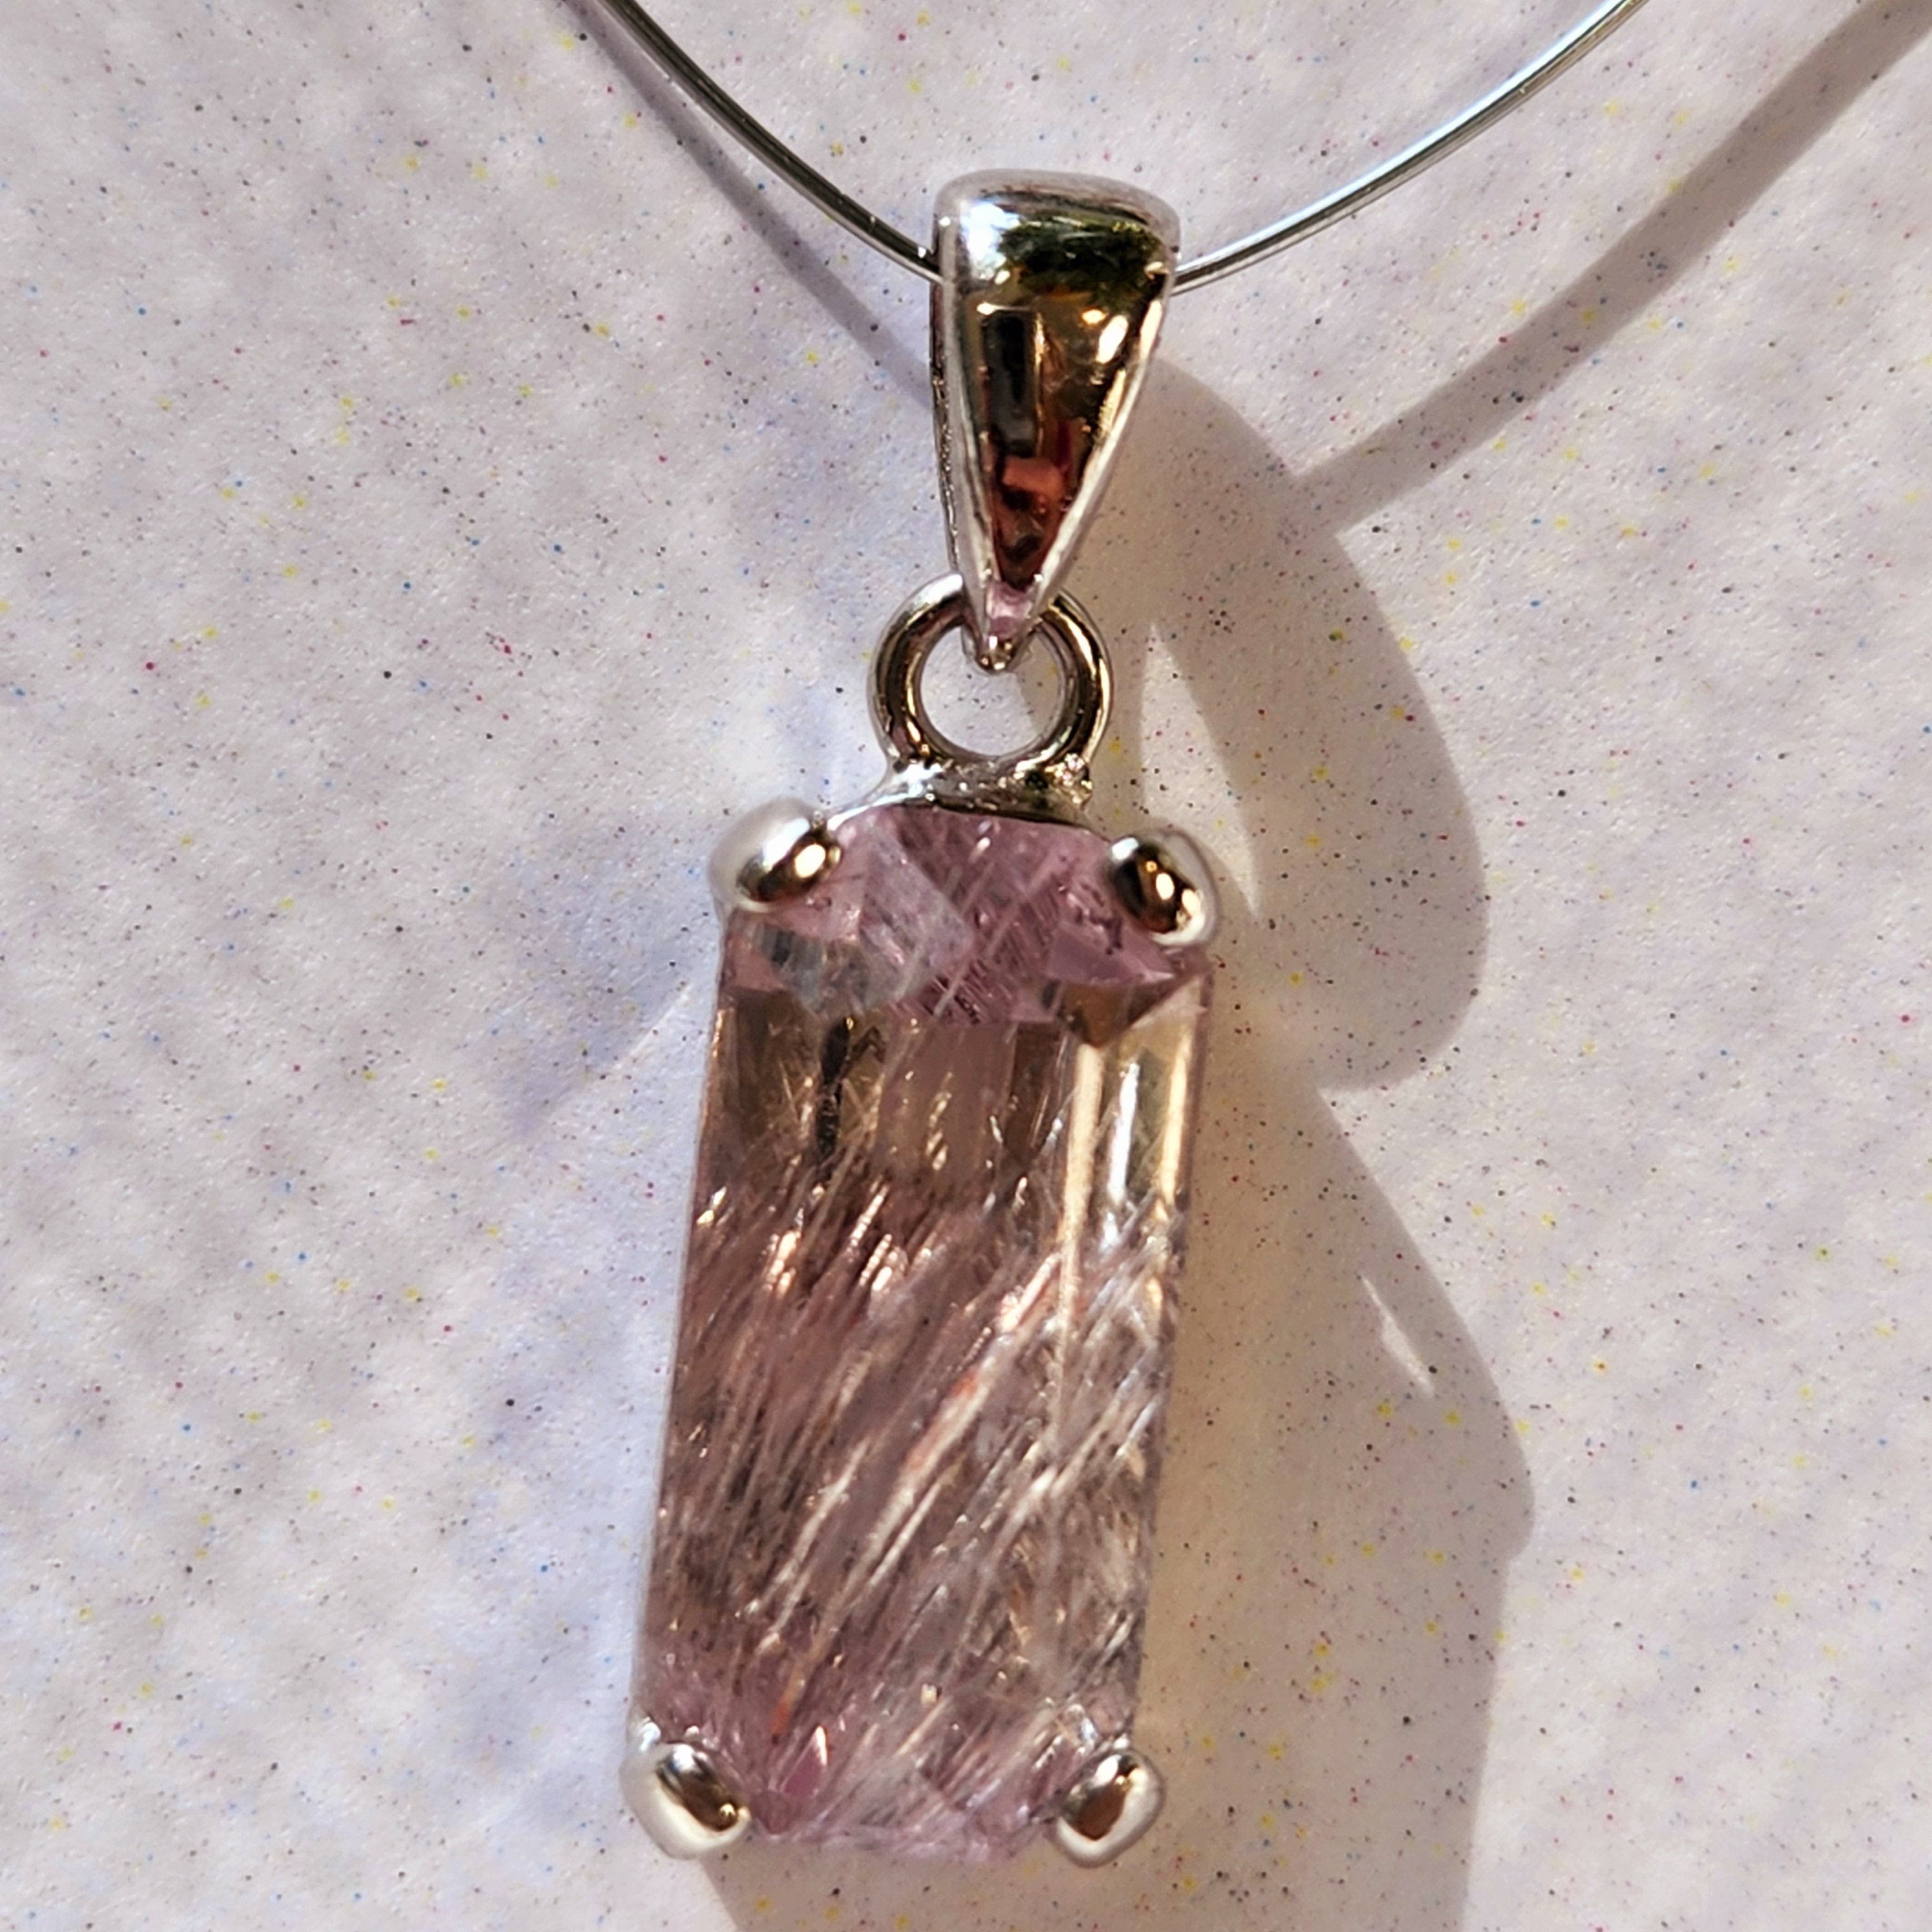 Kunzite with Silver Rutile Pendant .925 Silver (High Quality) for Emotional, Family Healing and Opening Your Heart to Love